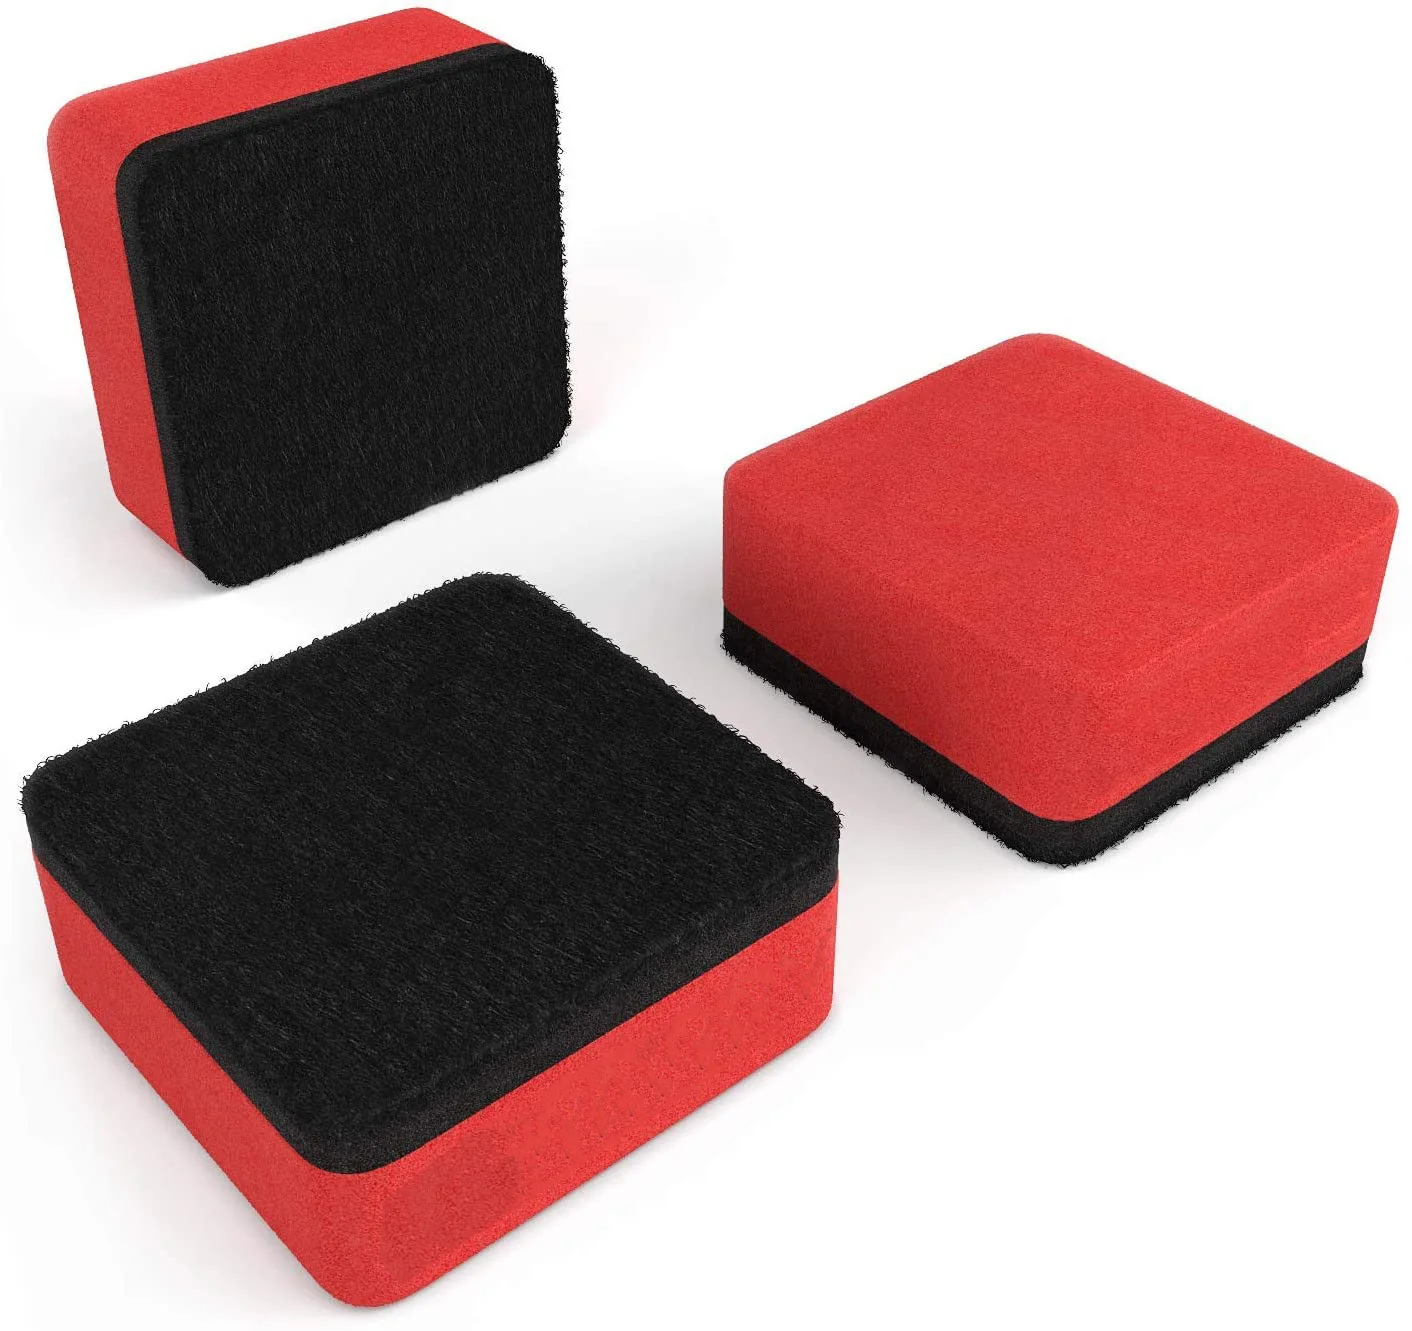 Small Magnetic Whiteboard Dry Erasers, Perfect for the Office, בית, or Classroom